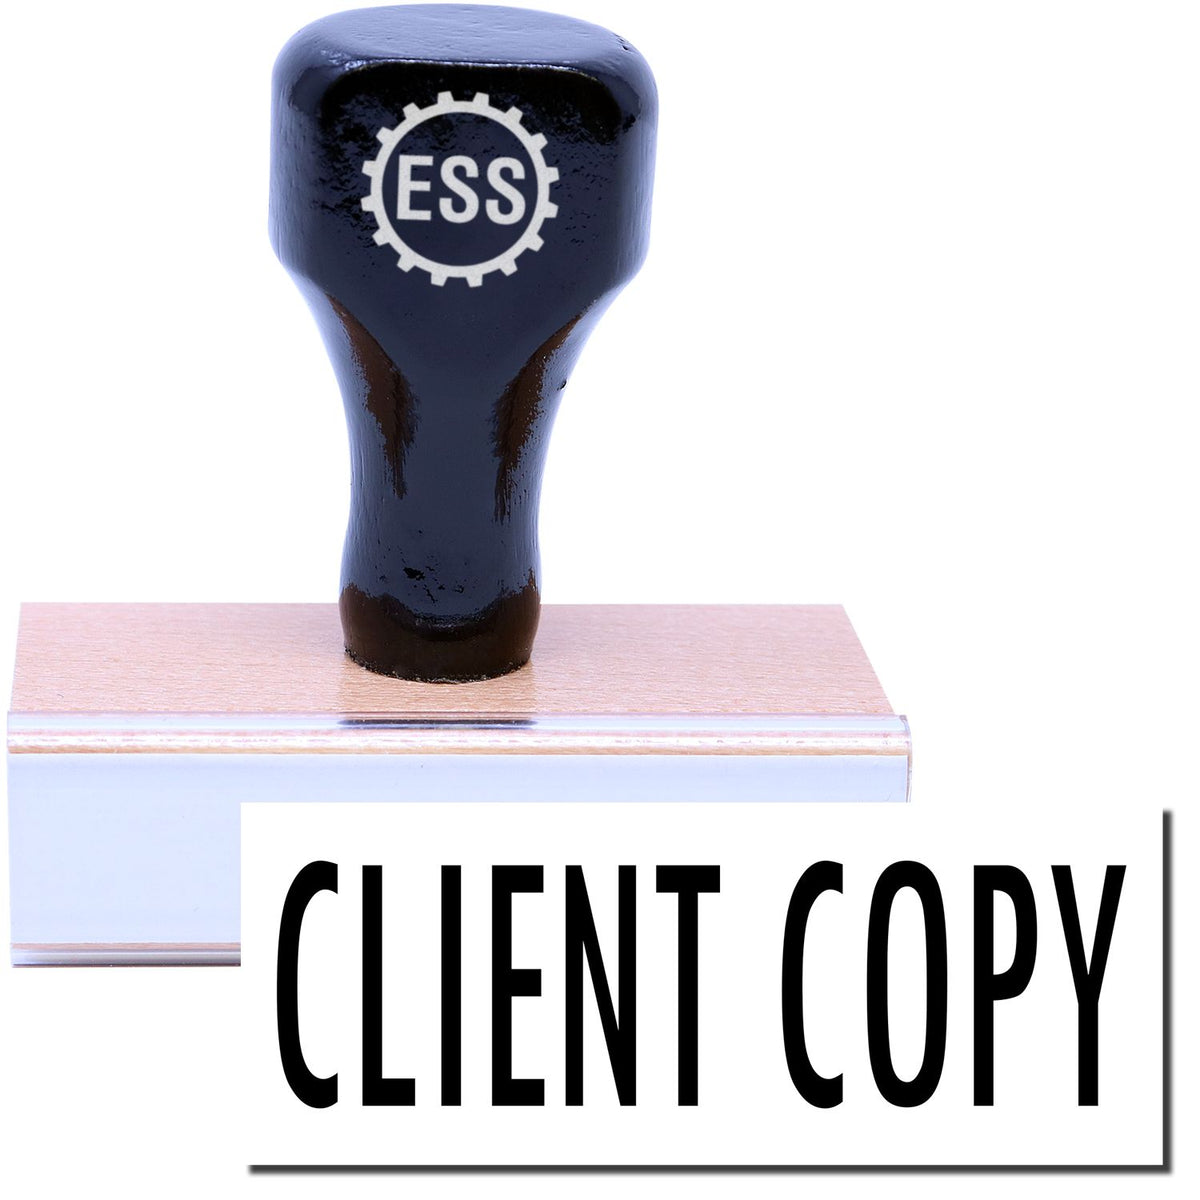 A stock office rubber stamp with a stamped image showing how the text &quot;CLIENT COPY&quot; is displayed after stamping.